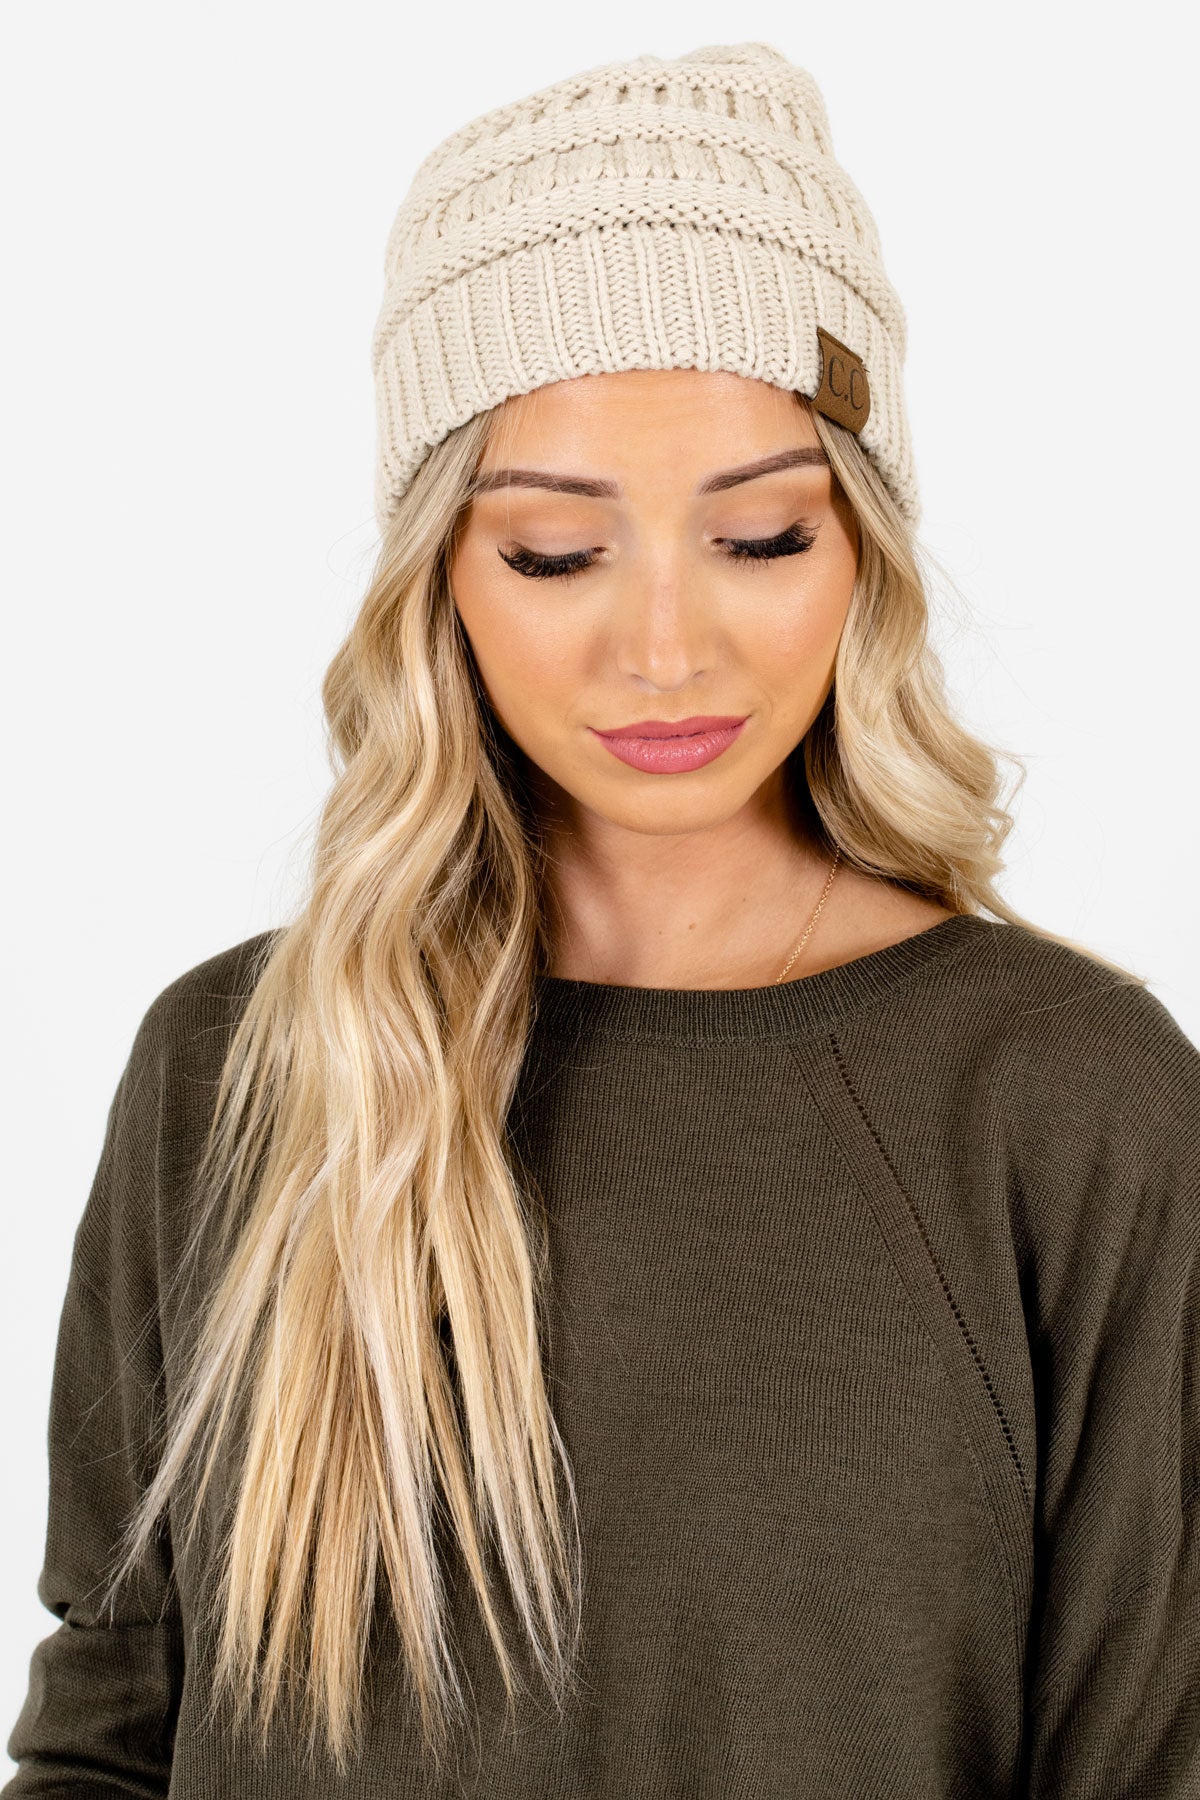 Women’s Cream Warm and Cozy Boutique Beanies